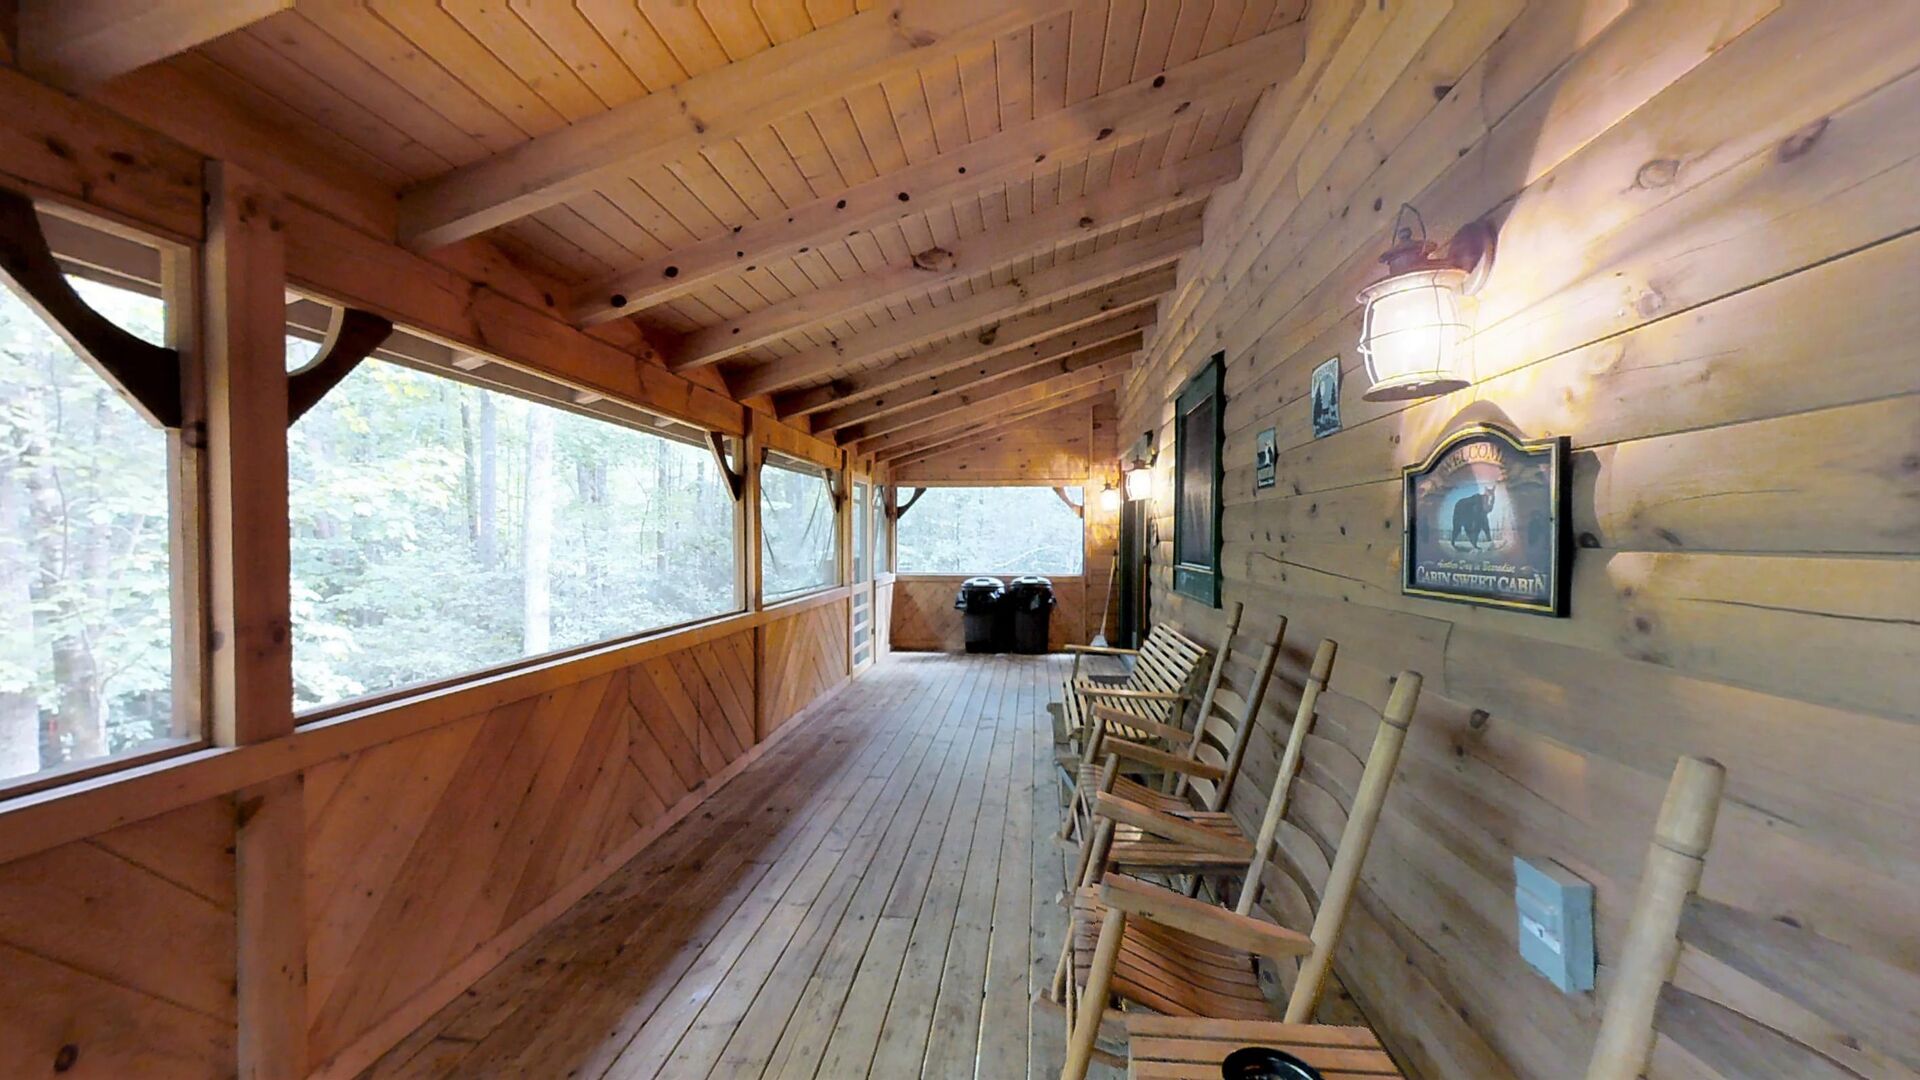 Screened in back yard deck that runs the full length of the cabin with rocking chairs, hot tub, swing overlooking large private yard